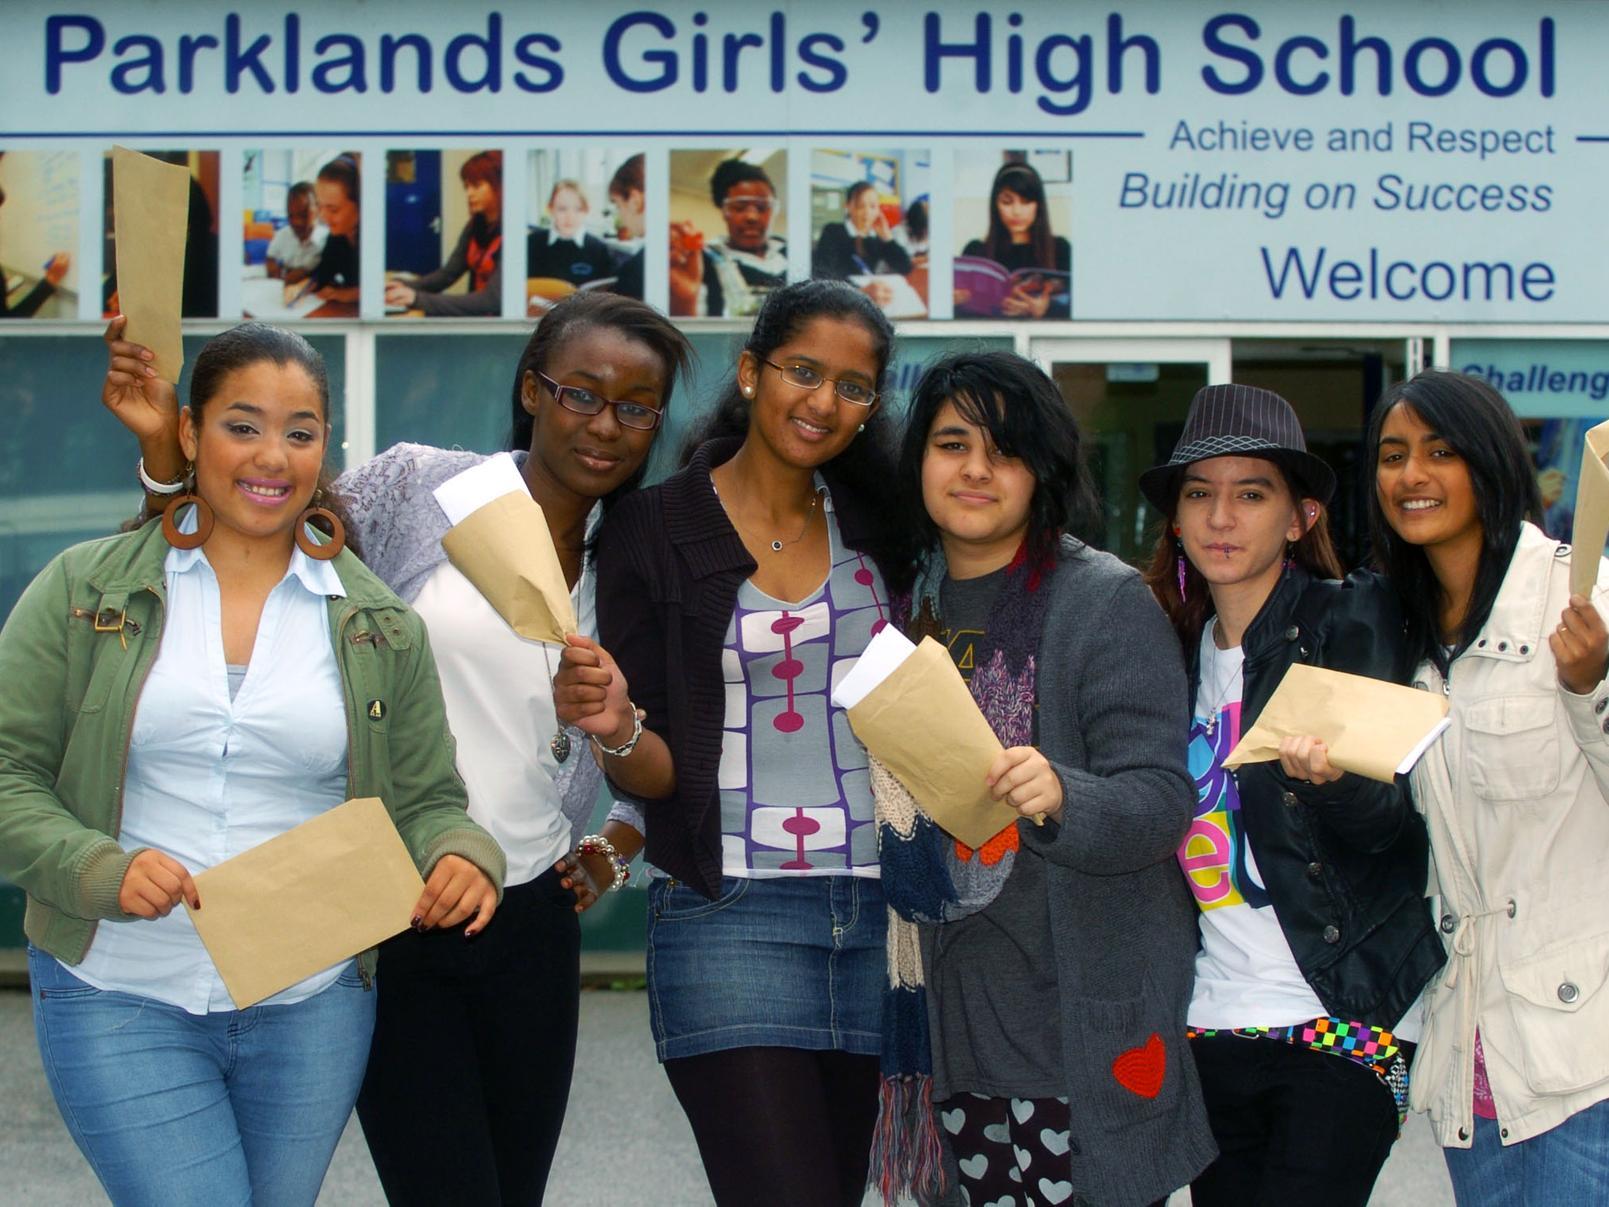 These students celebrate their A level results. From left, Ana Baptista, Suliat Ogunyinka, Meyada Ali, Nazmeen Galab, Lisa Neves and Iesha Mistry.